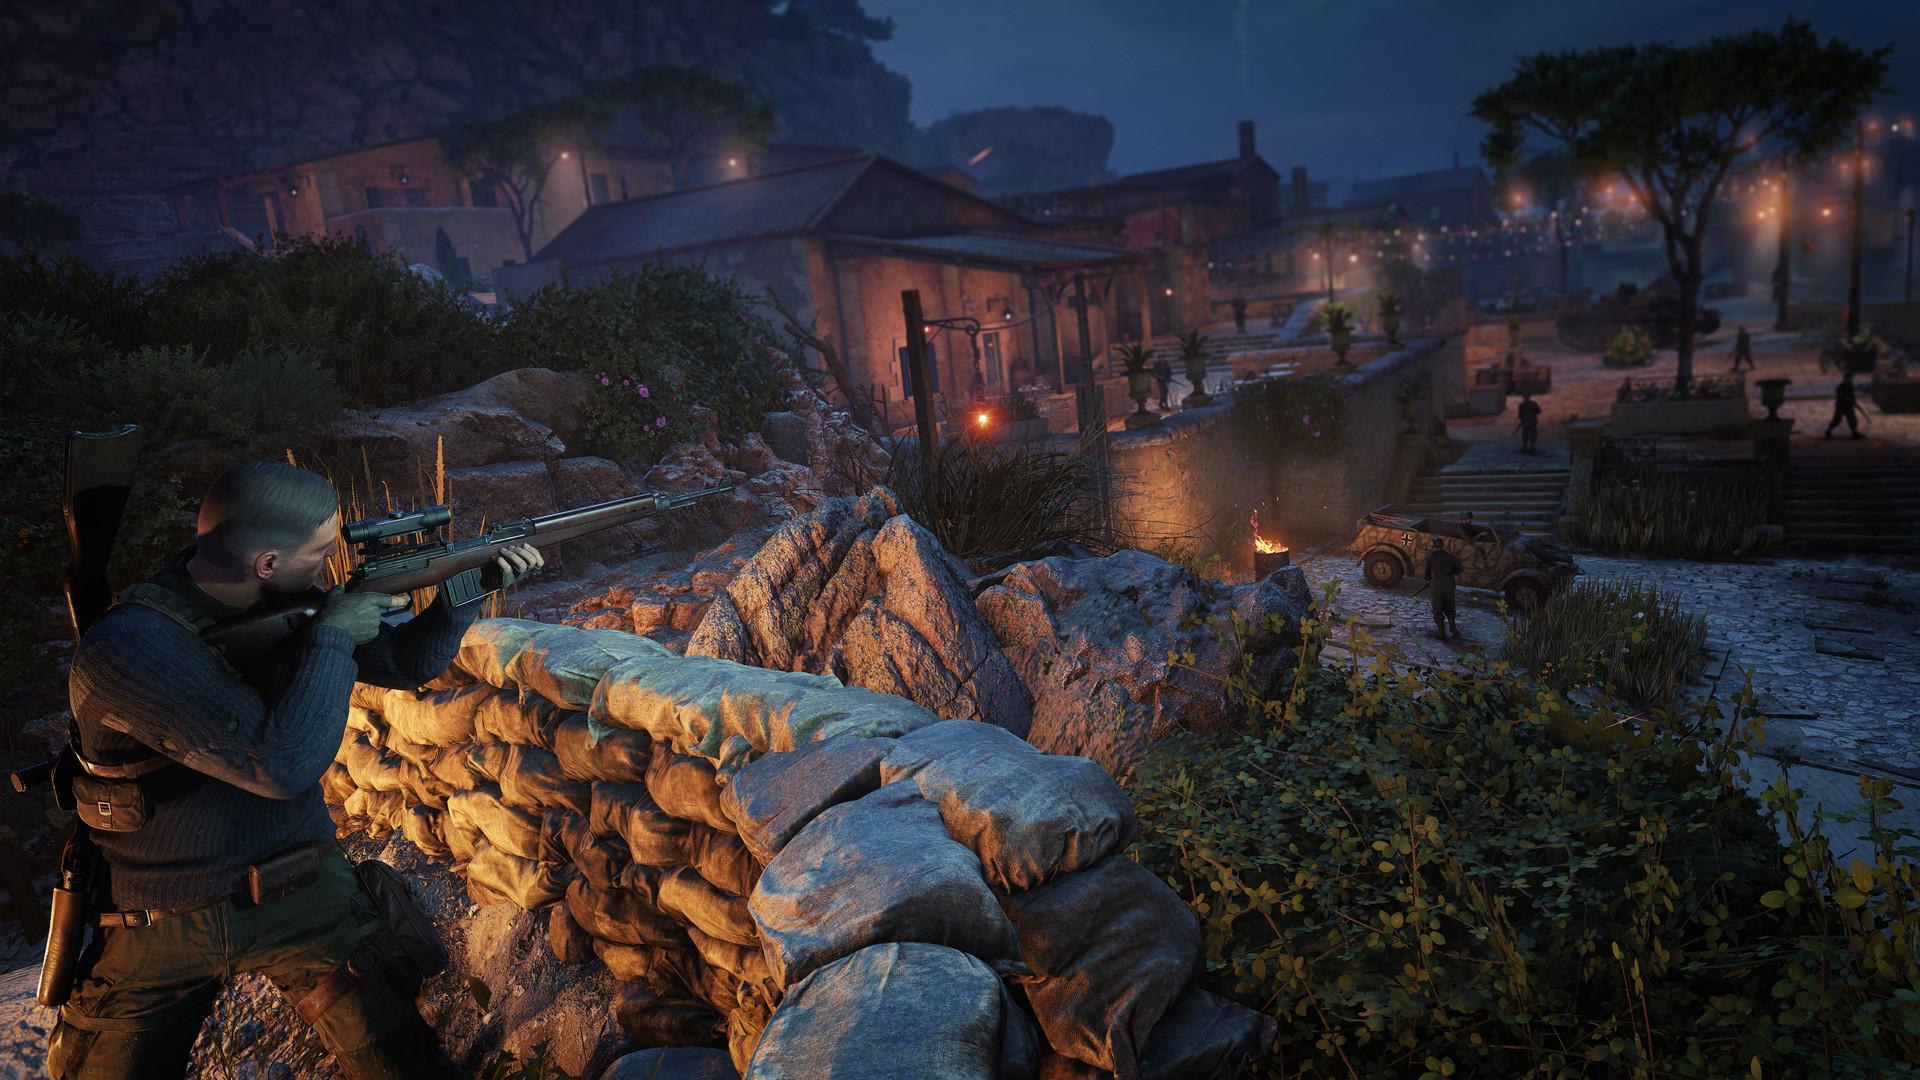 Sniper Elite 5 : Landing Force Mission and Weapon Pack